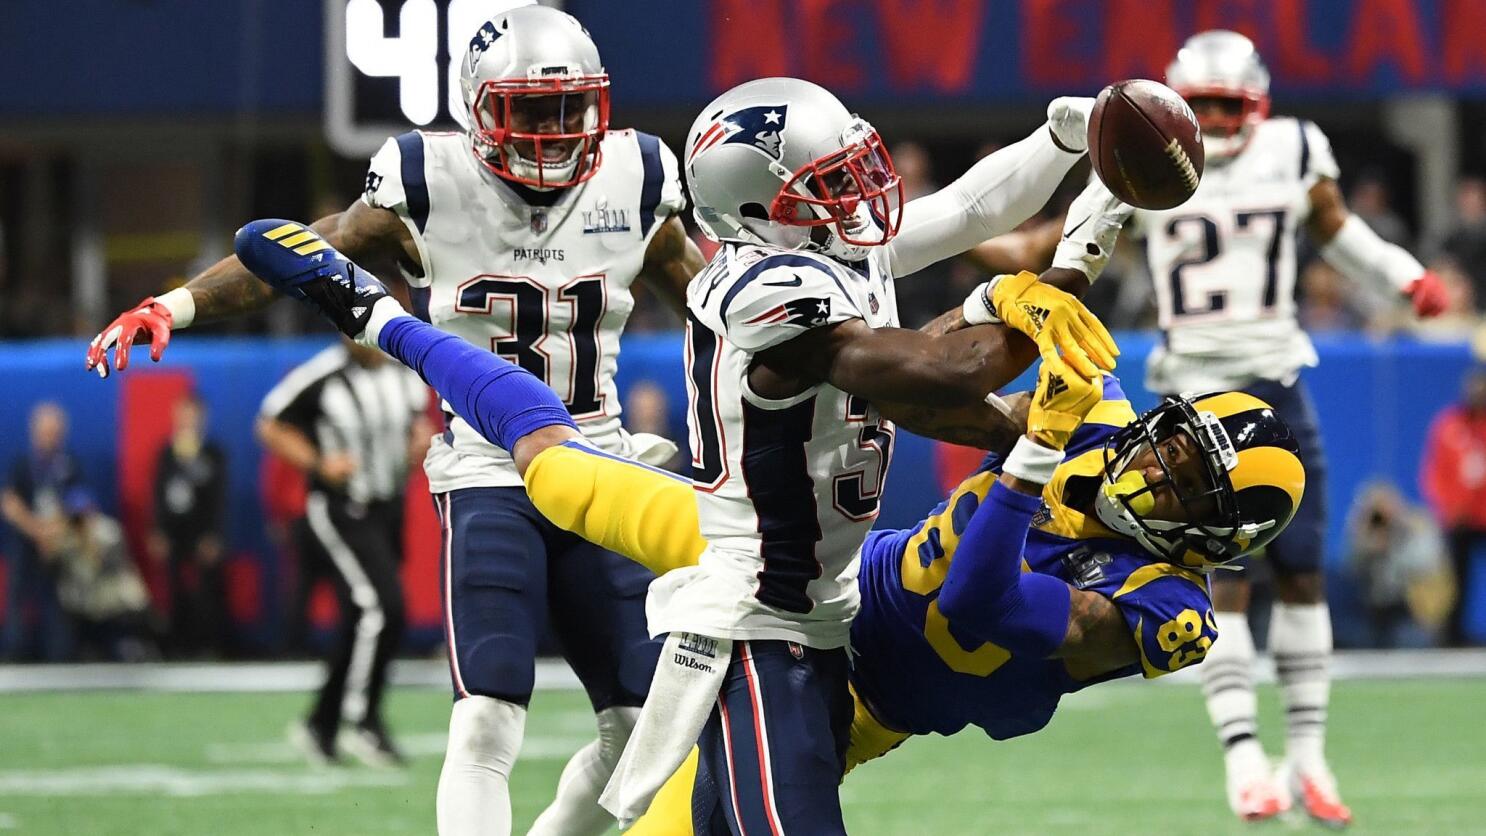 2019 Super Bowl: Patriots will wear white against the Rams - Pats